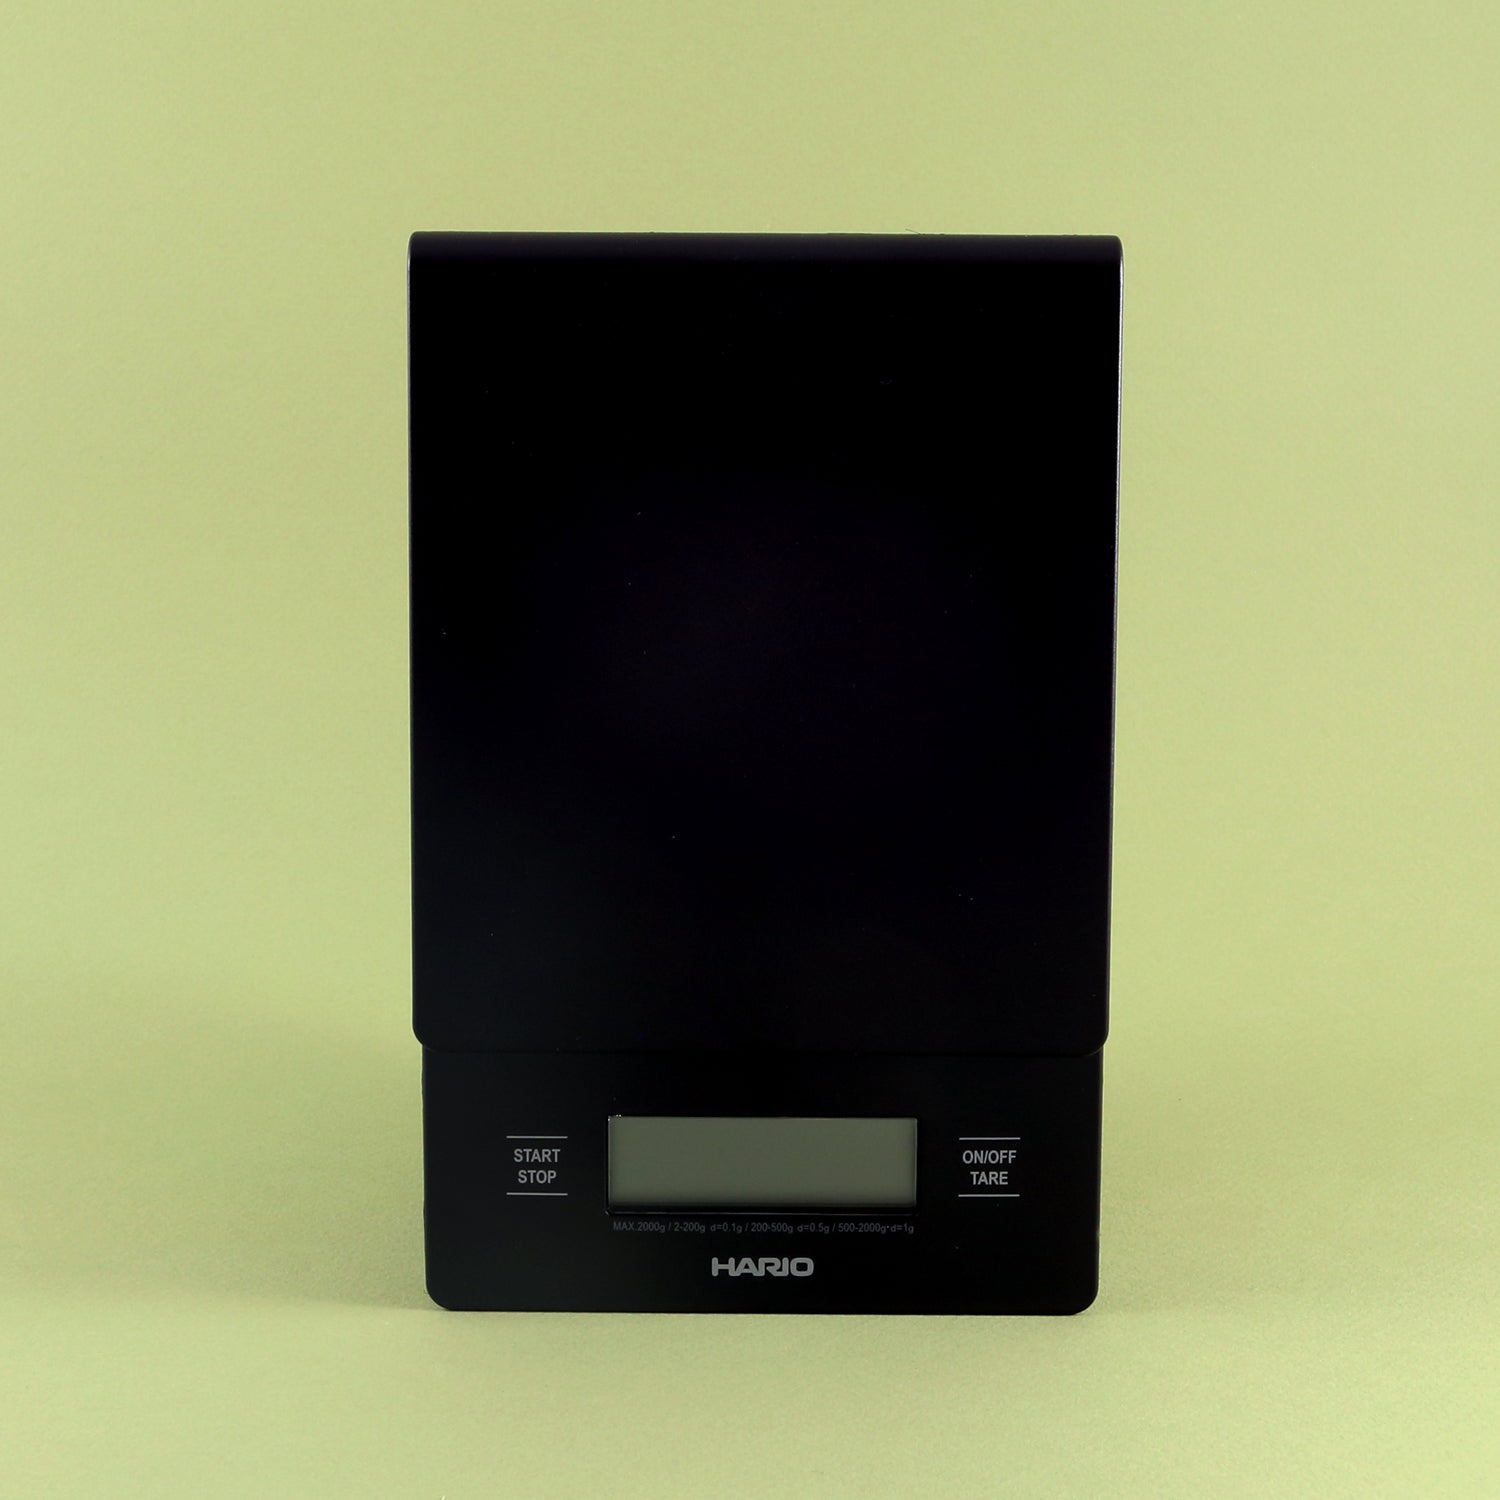 A black Tandem V60 Drip Scale with digital display, centered on a pale green background. The scale features buttons for start, stop, and tare functions.